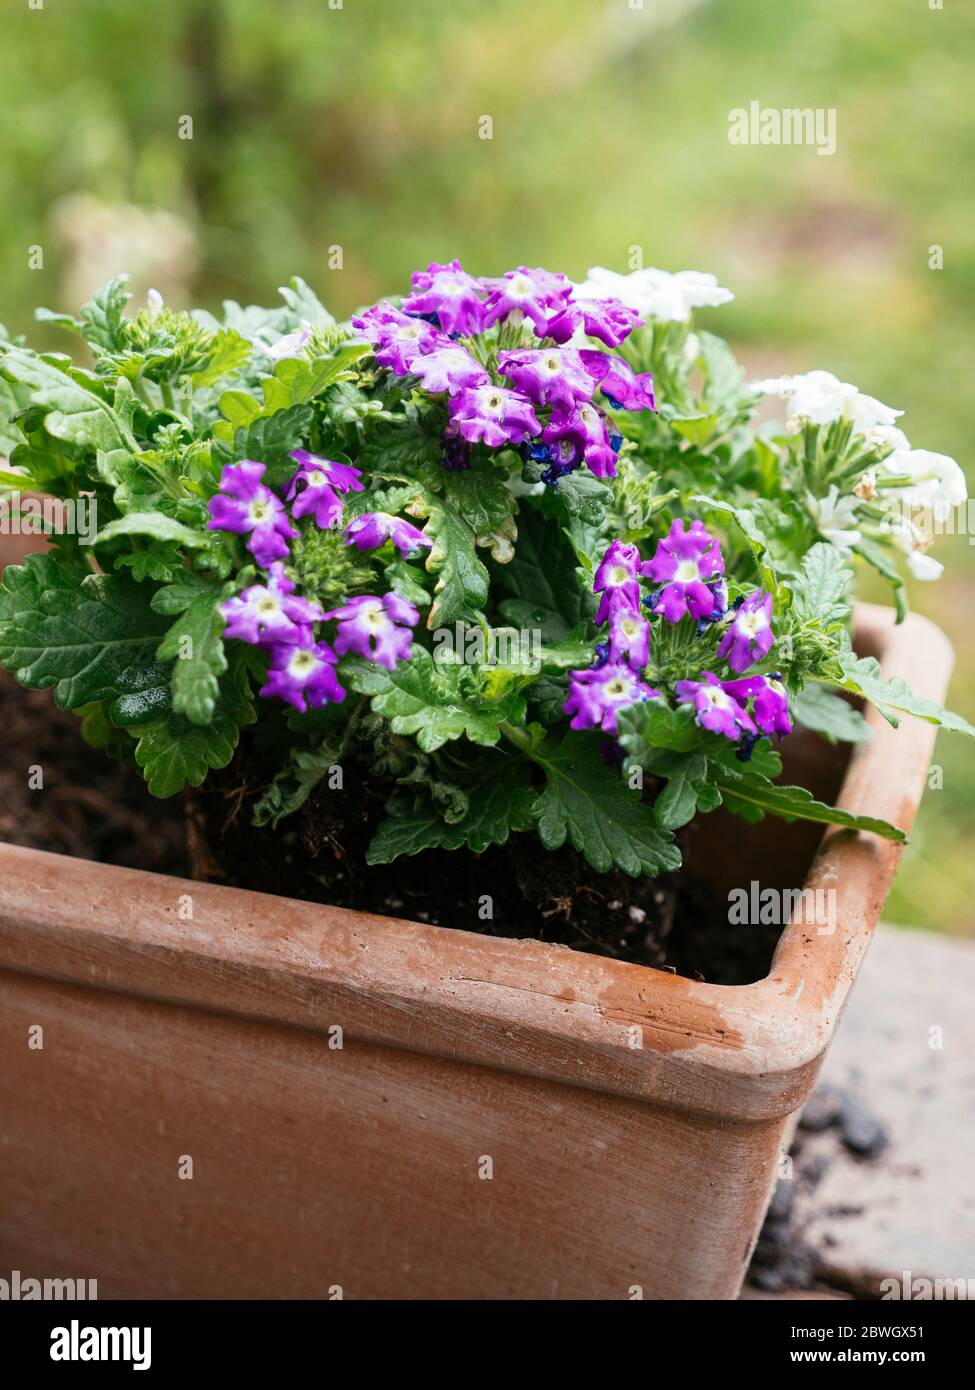 Trailing verbena flowers planted in a terracotta container. Stock Photo